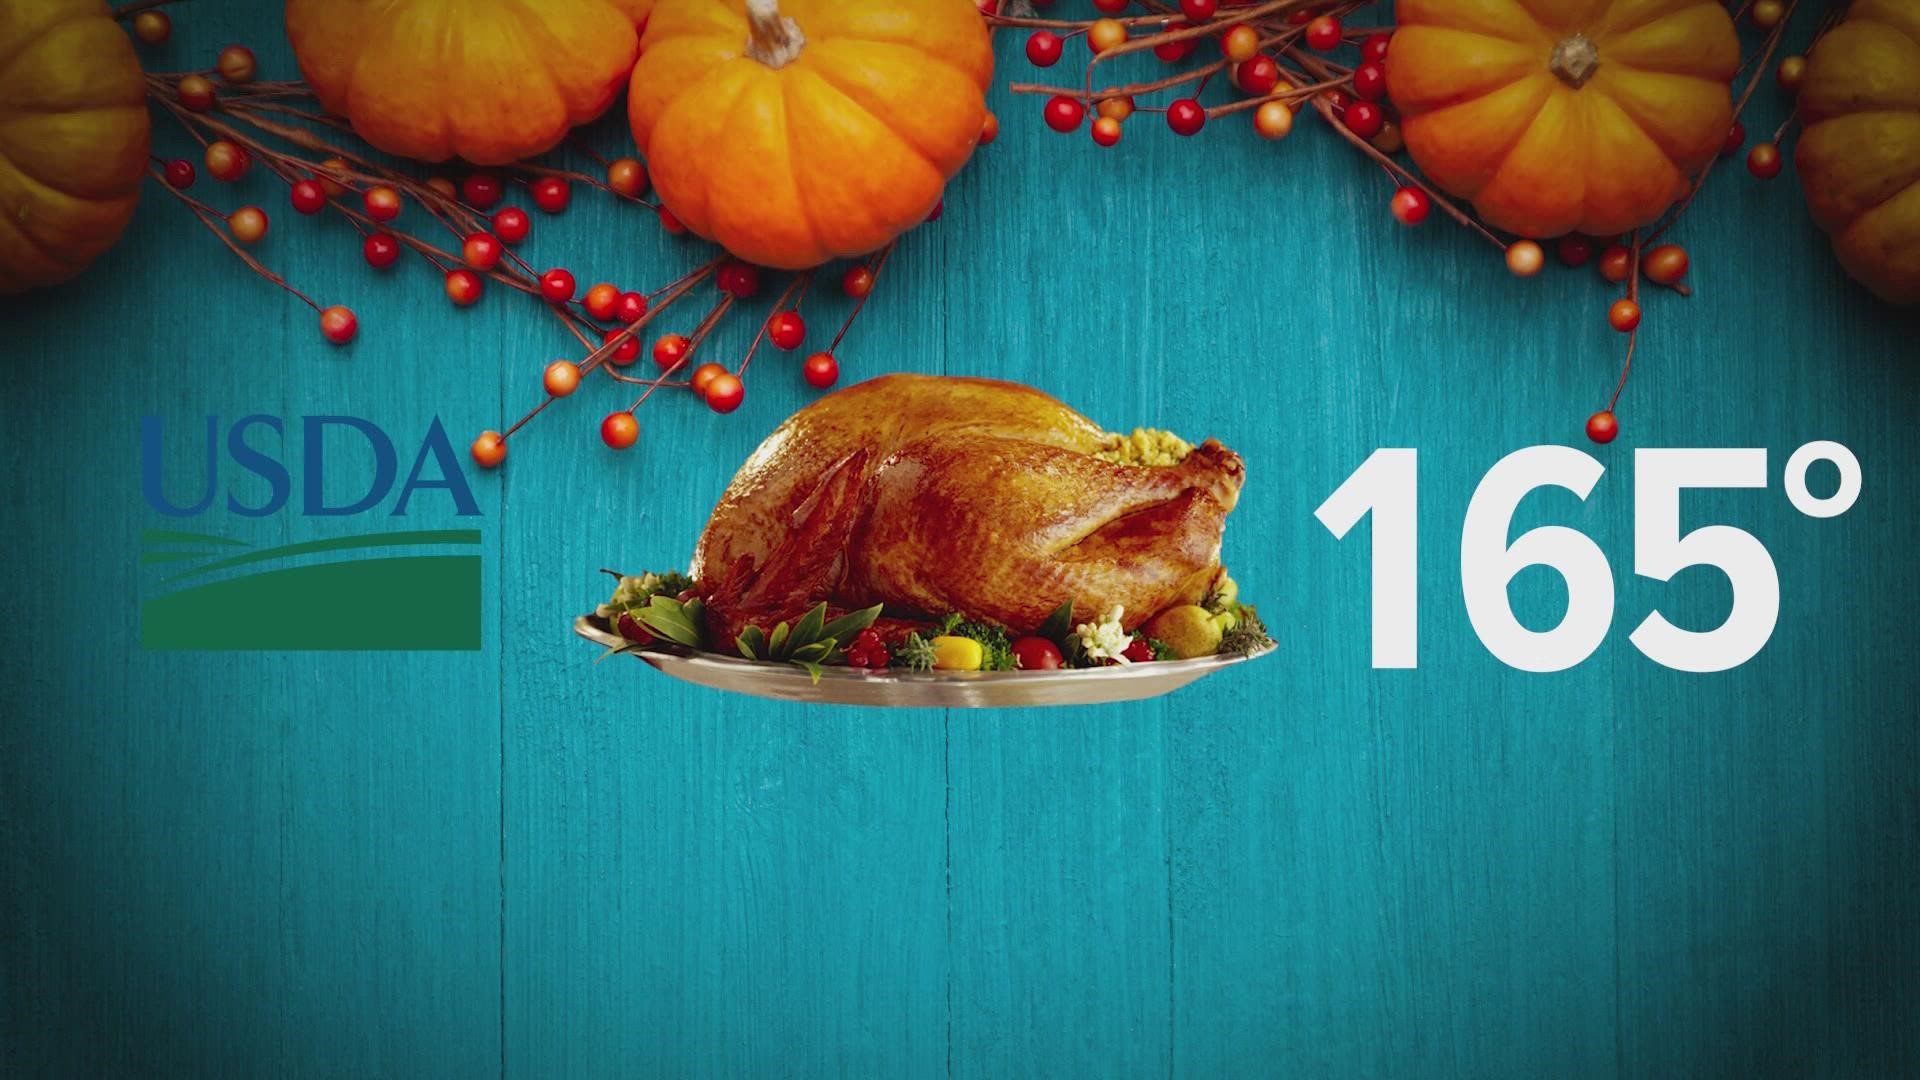 Here are two quick tips you should know to have a well-cooked turkey.